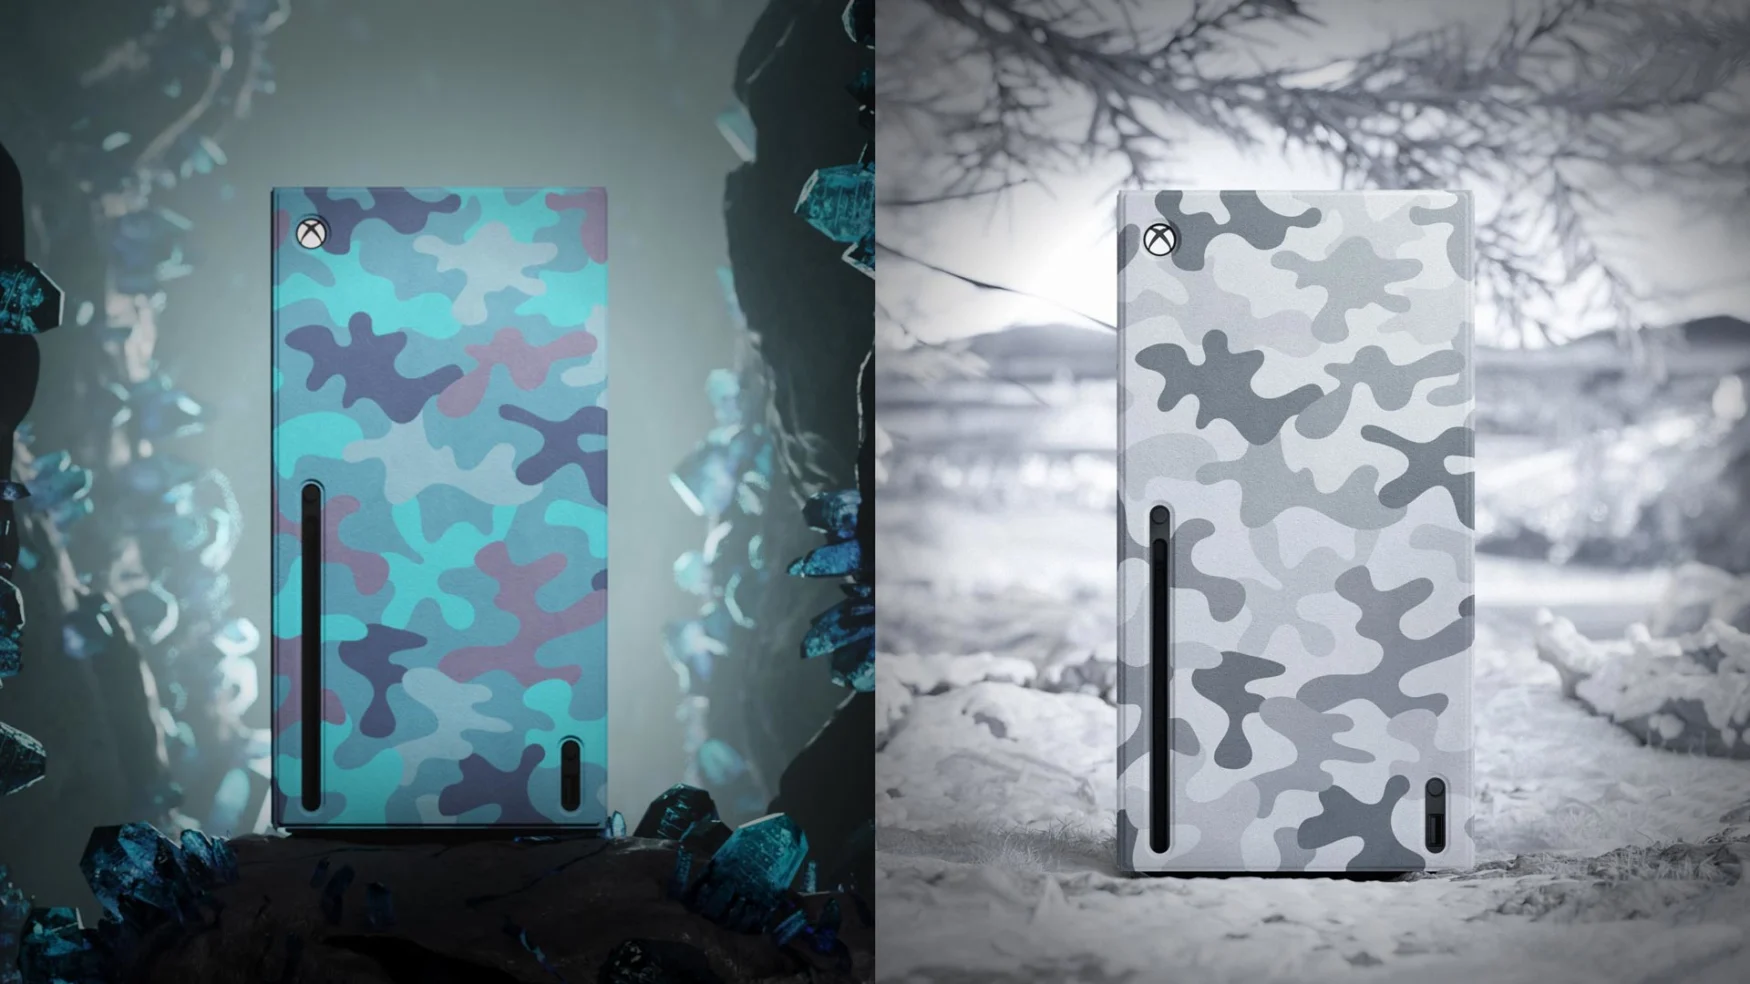 Xbox Series X camouflage wraps. Custom skins give the console blue and grey camo looks.